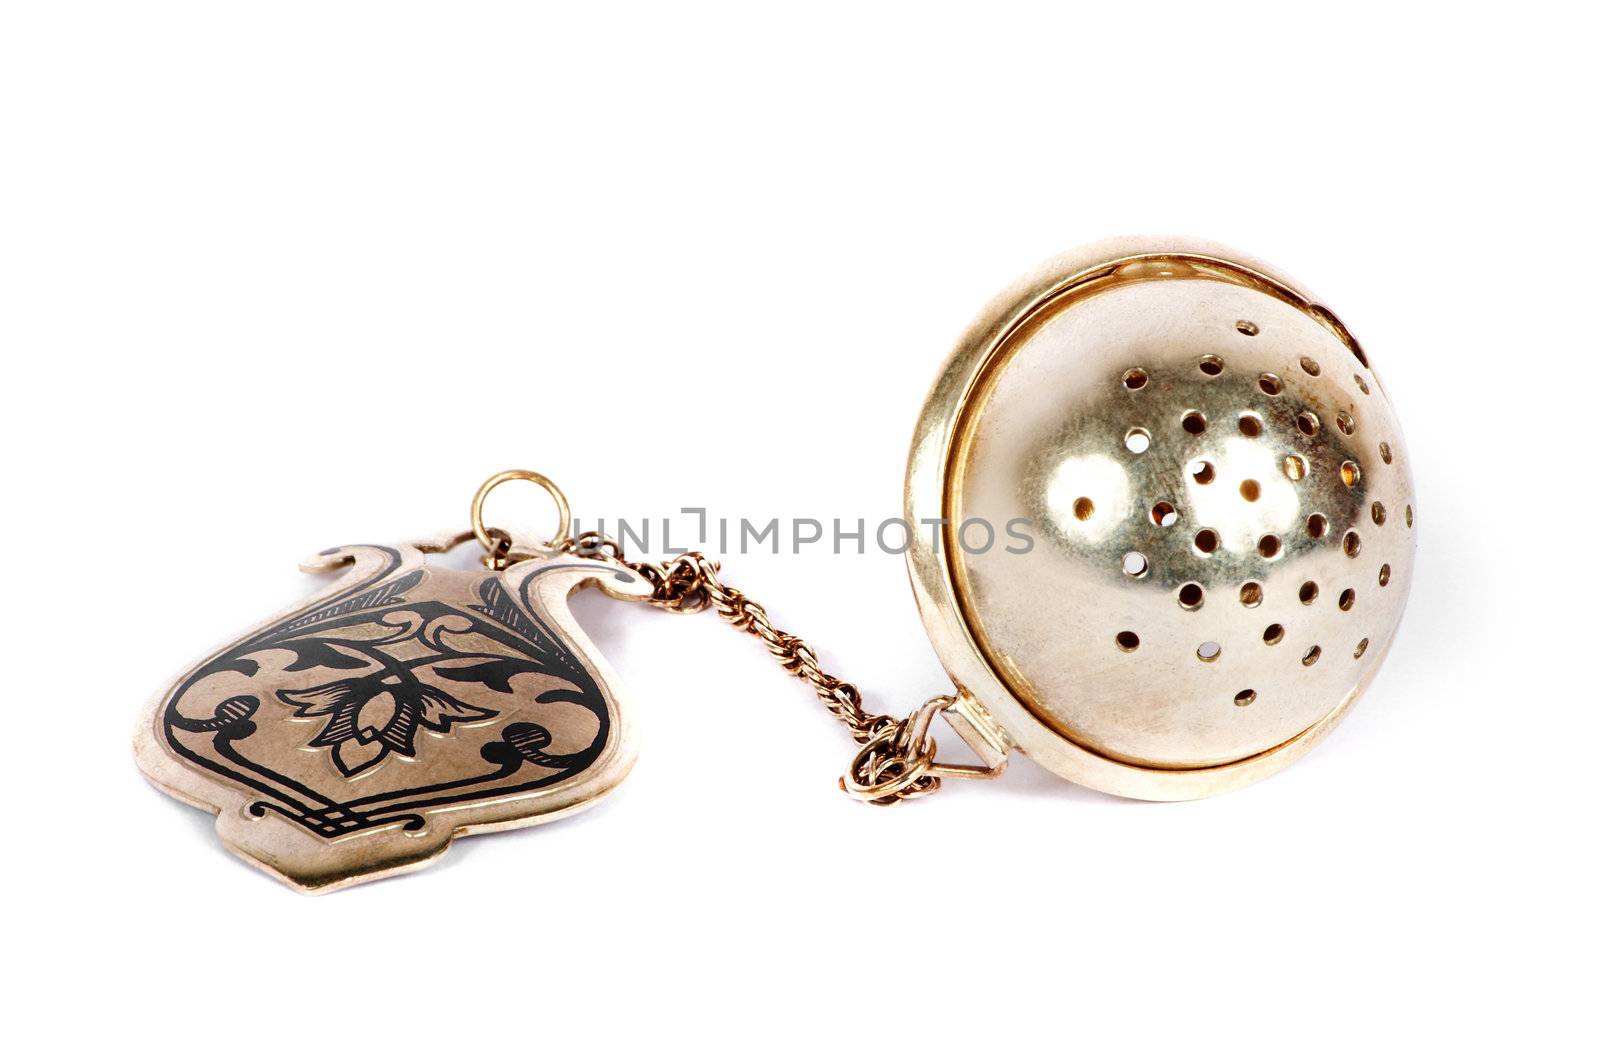 Old silver tea-strainer on a white background